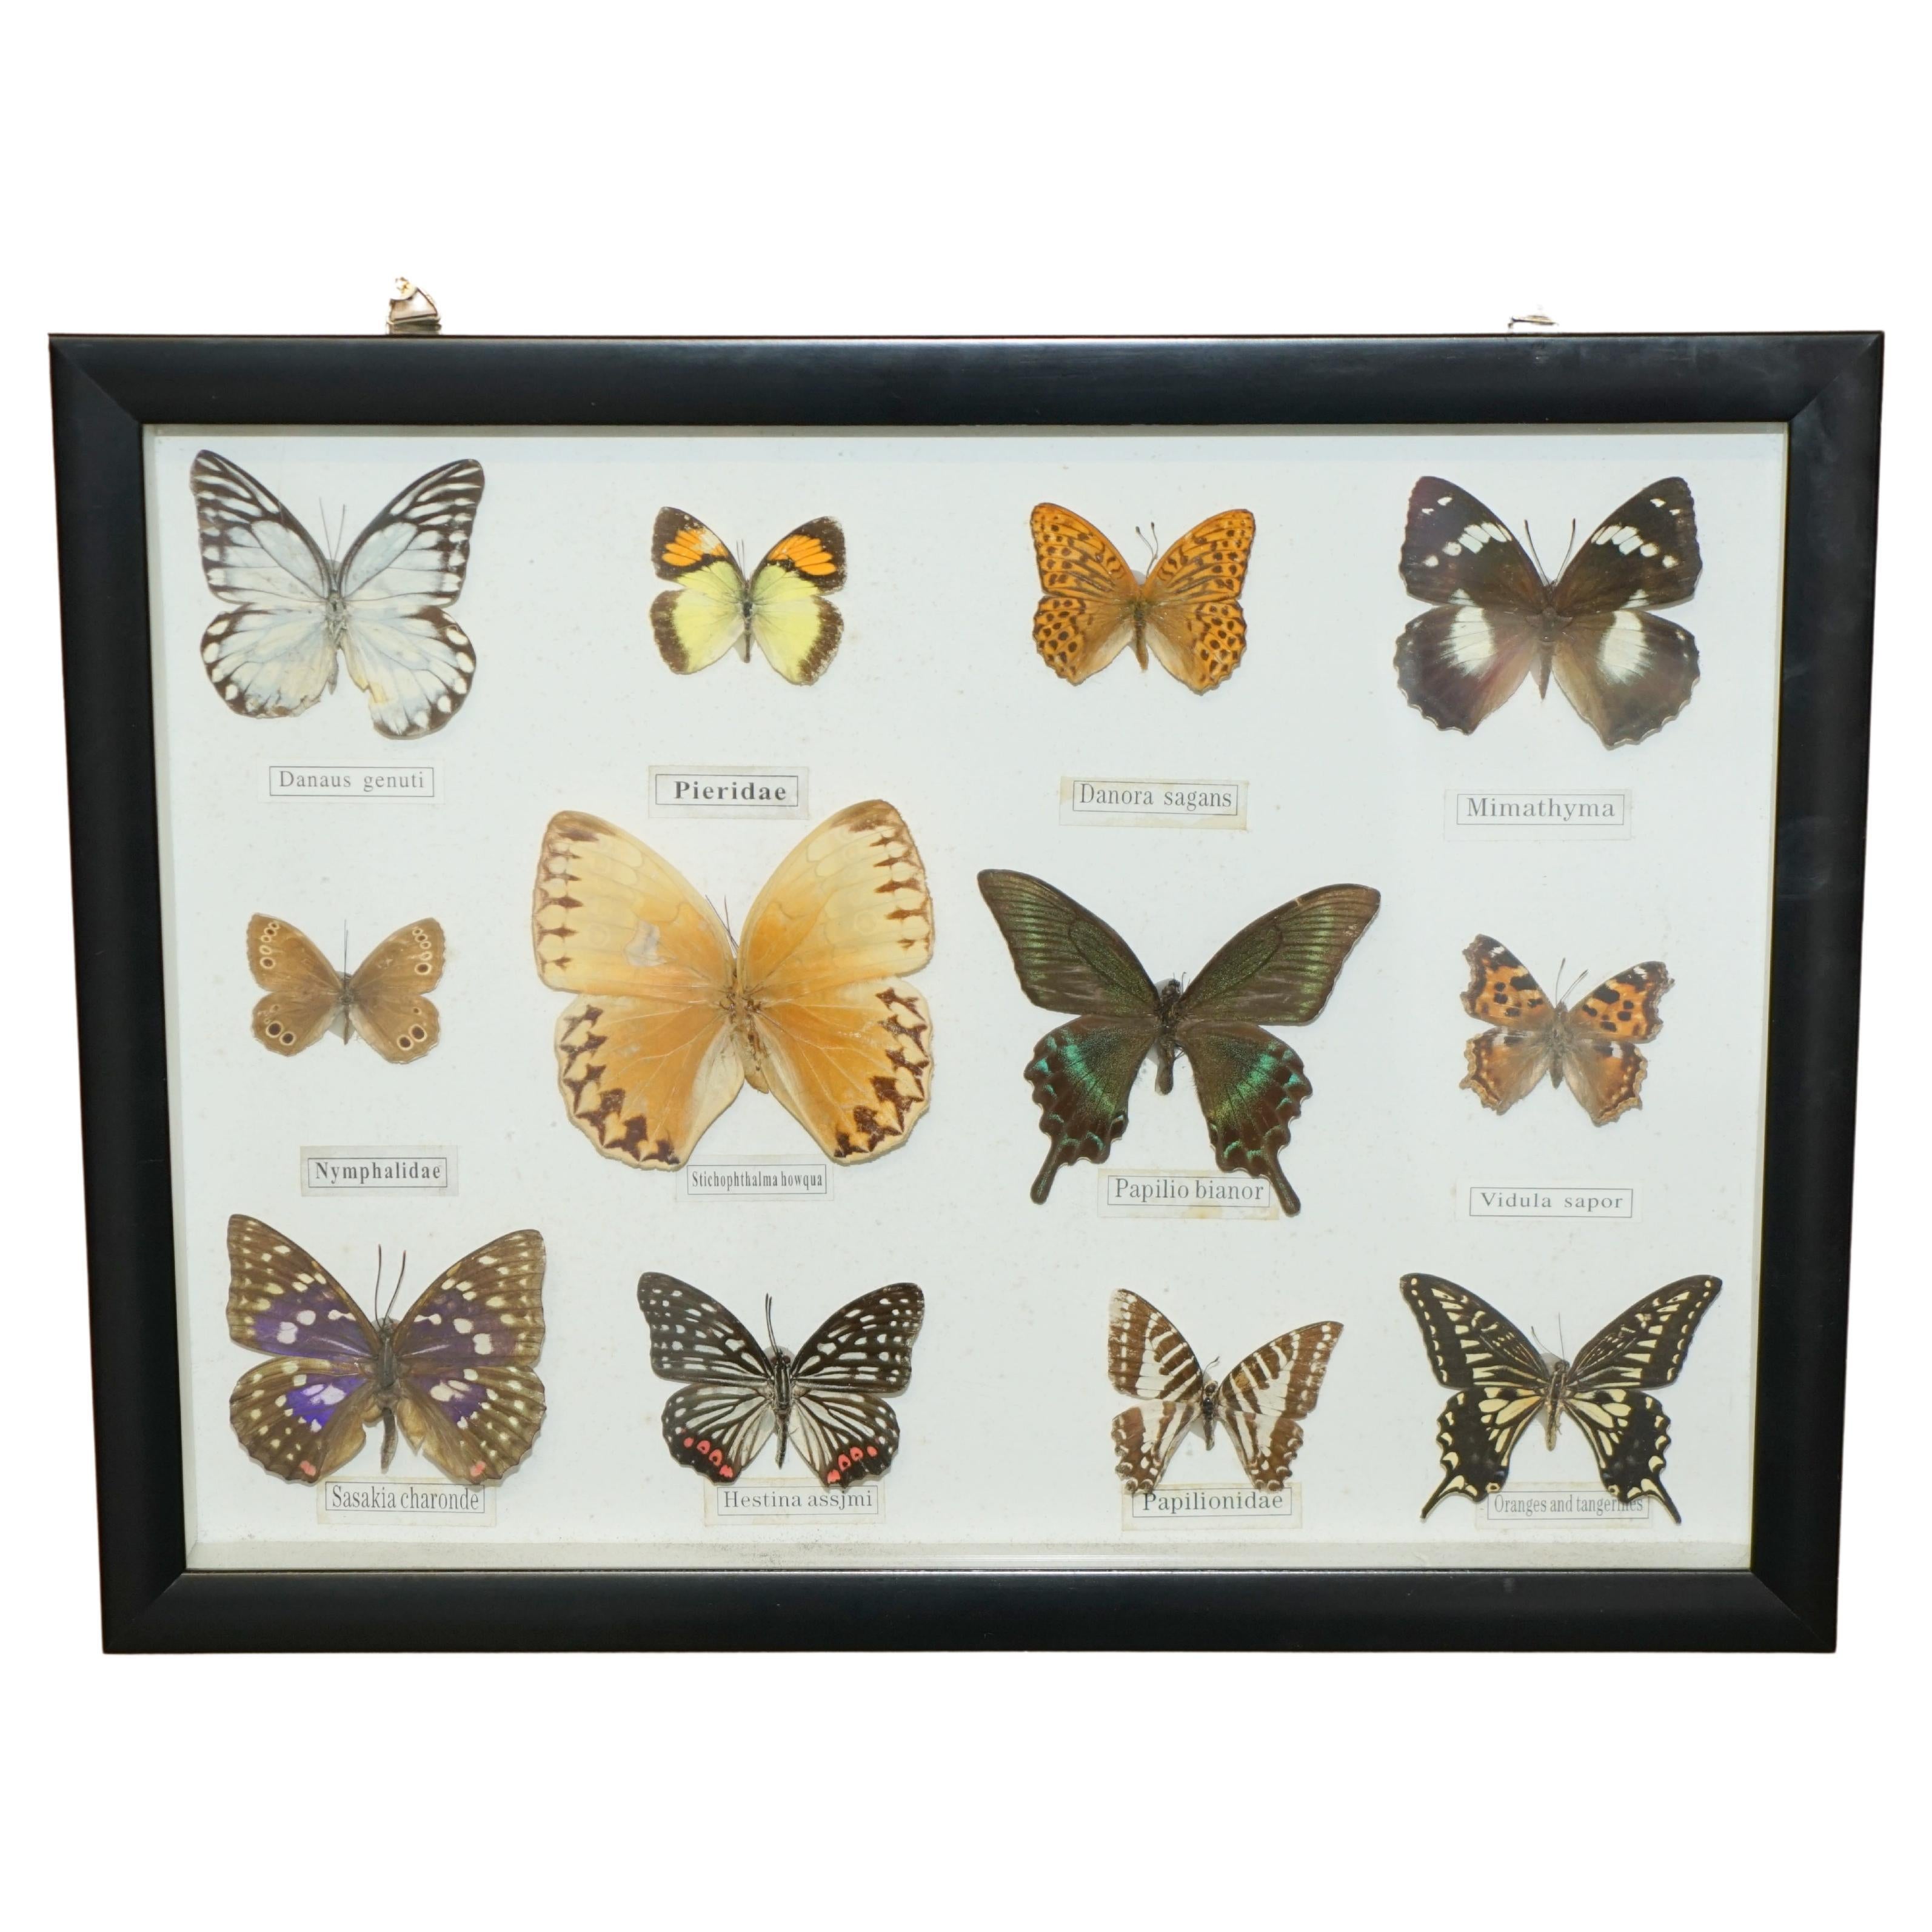 LARGE ViNTAGE TAXIDERMY BUTTERFLIES INSIDE GOOD SIZED DISPLAY CASE For Sale